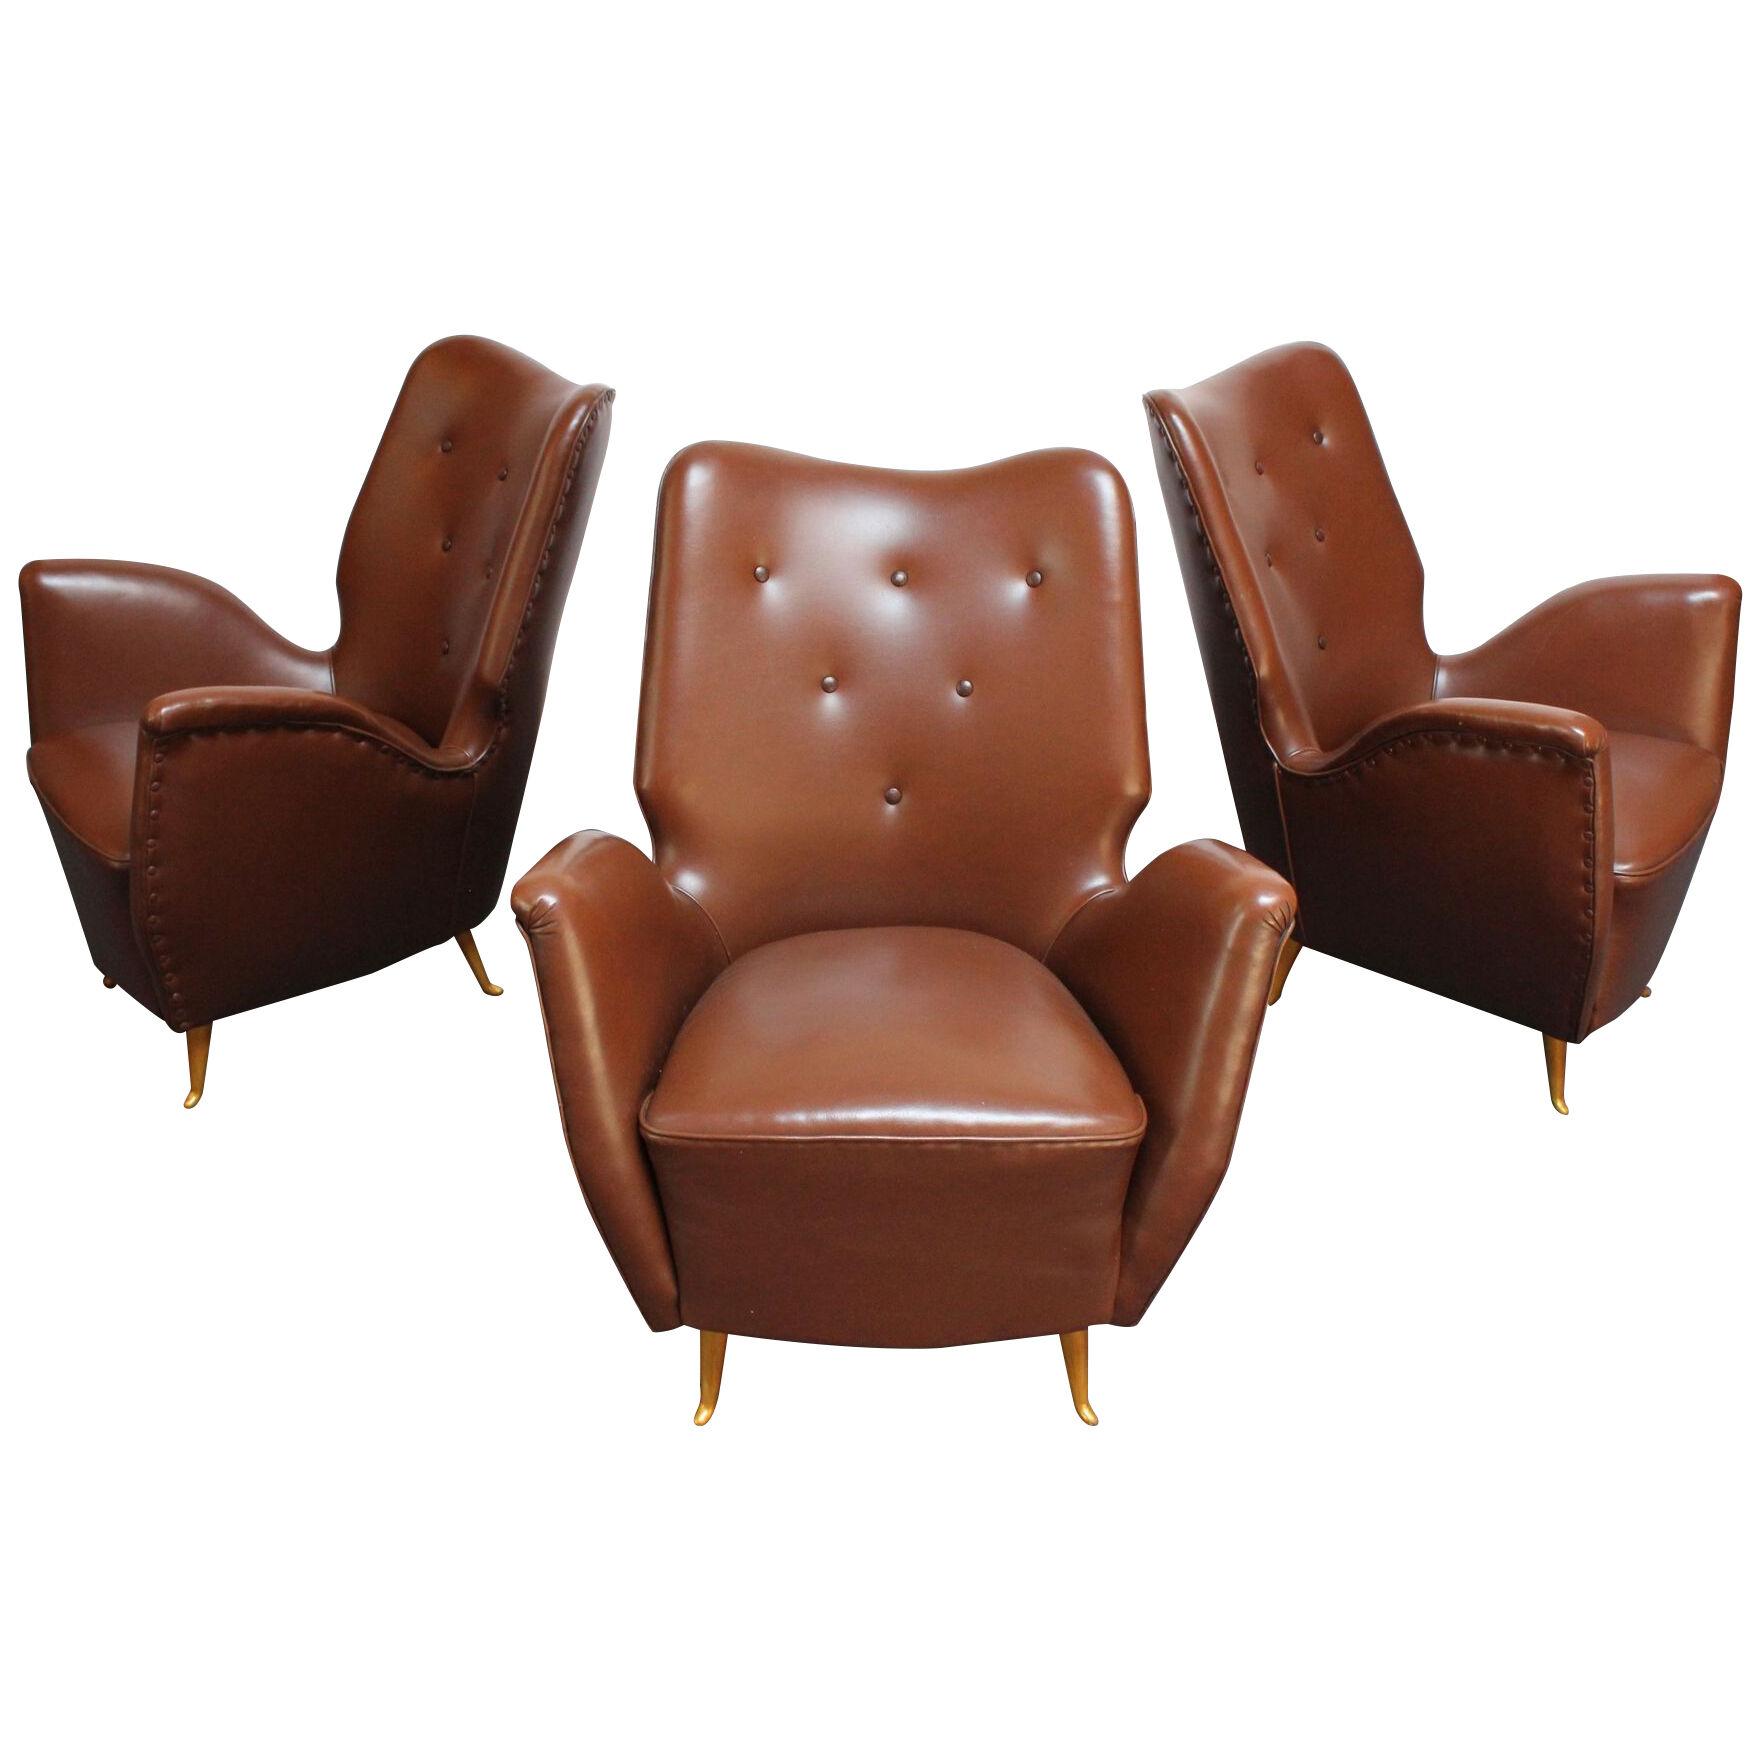 Single Sculptural Gio Ponti Petite Lounge Chair, Three Available